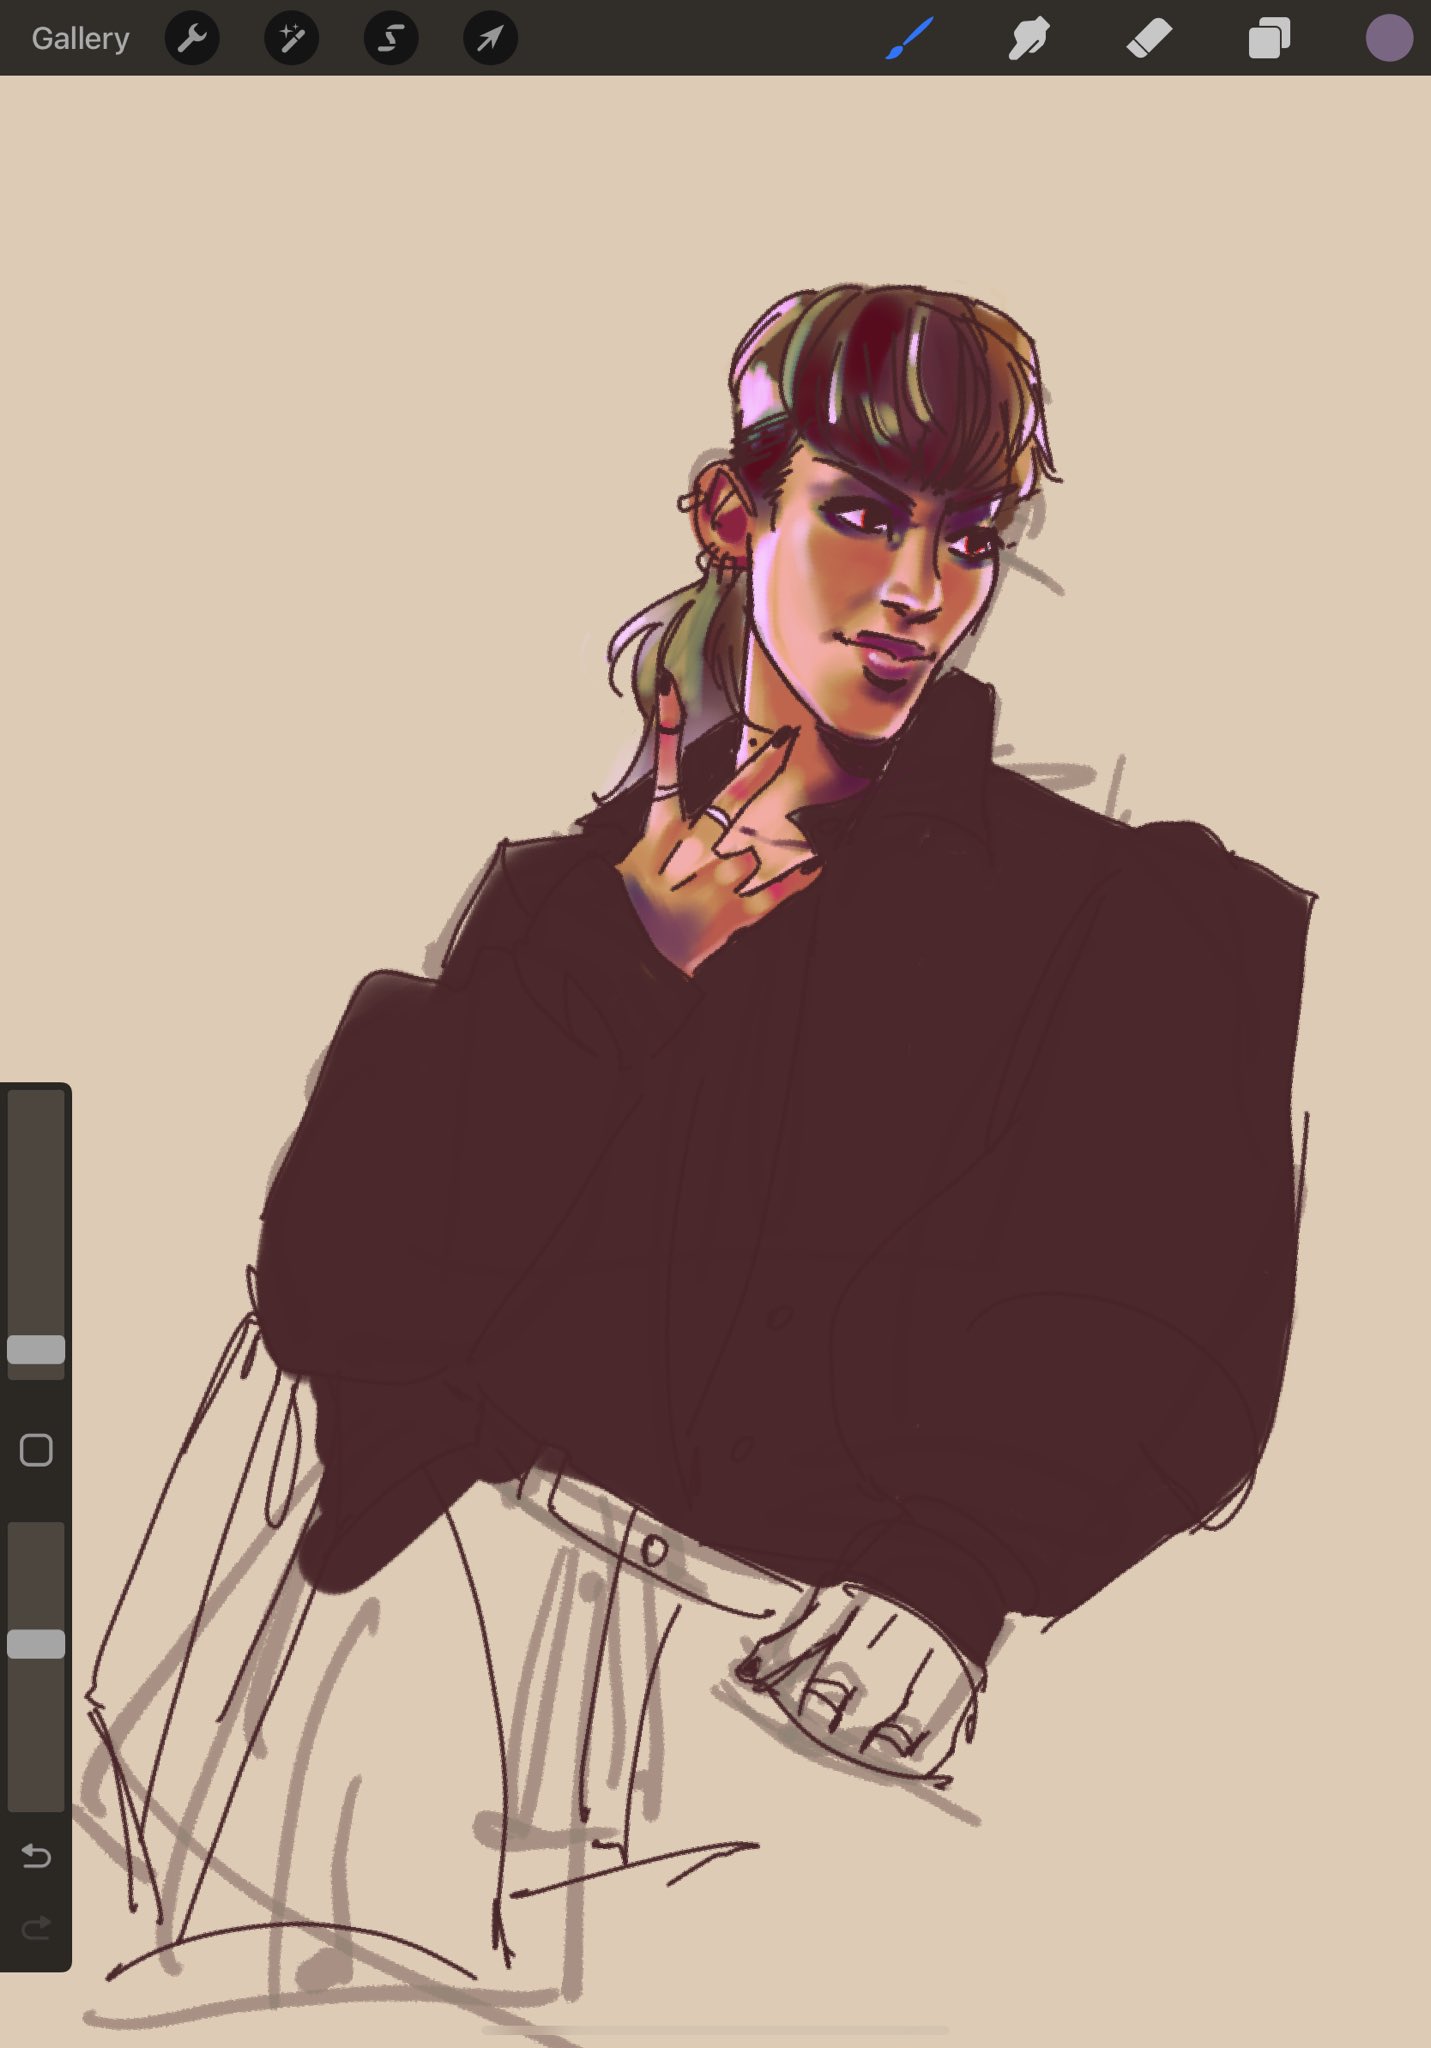 Art of Kim Hongjoong of ATEEZ. He has a mullet and is holding up a peace sign.